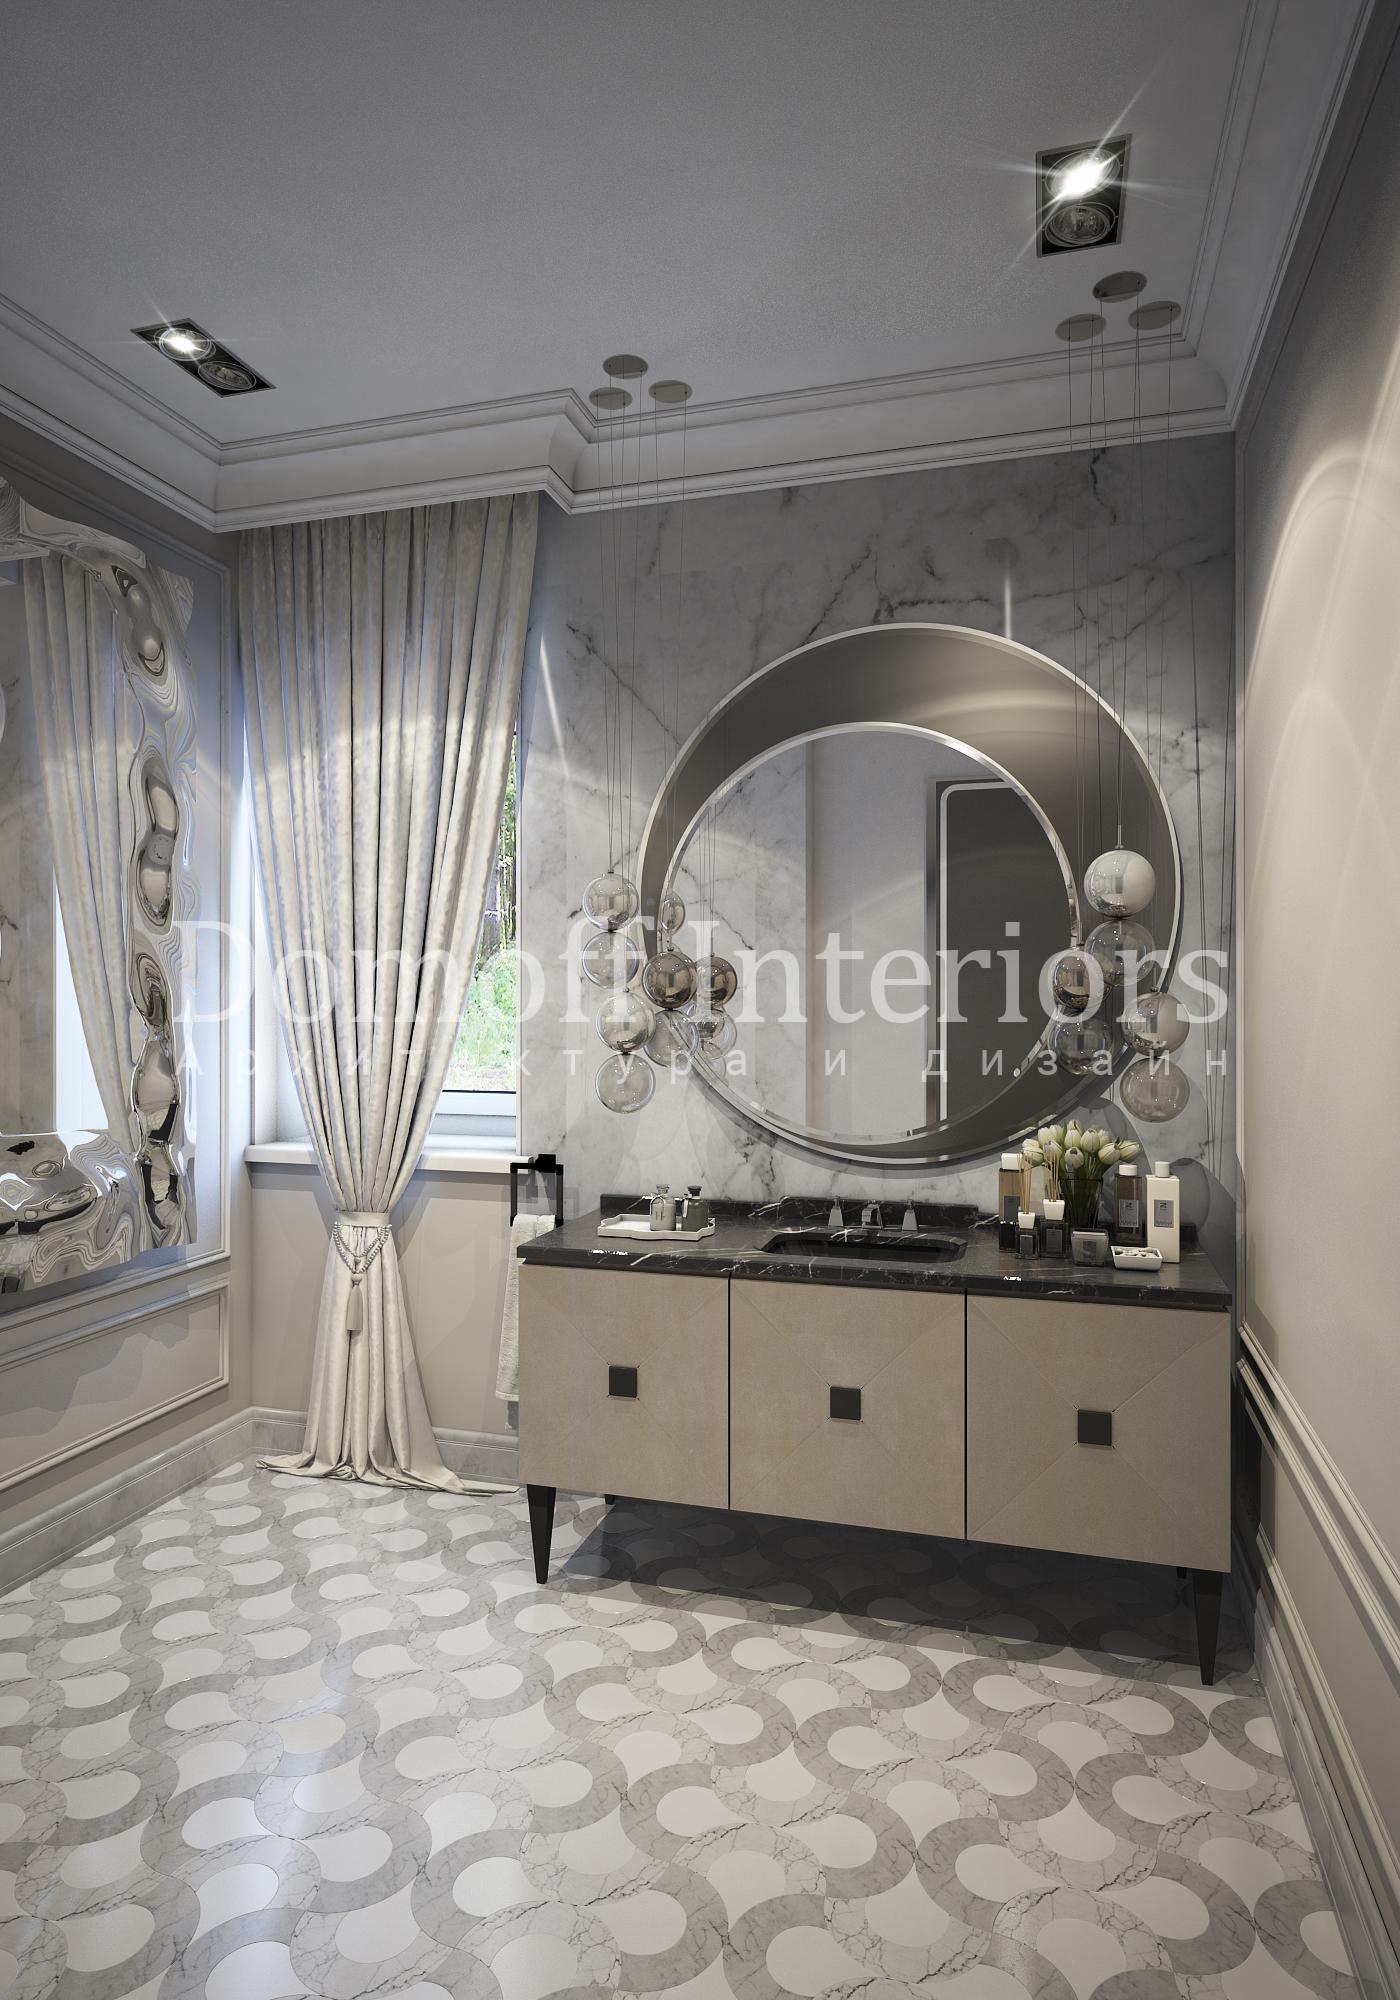 Санузел made in the style of Modern Eclecticism